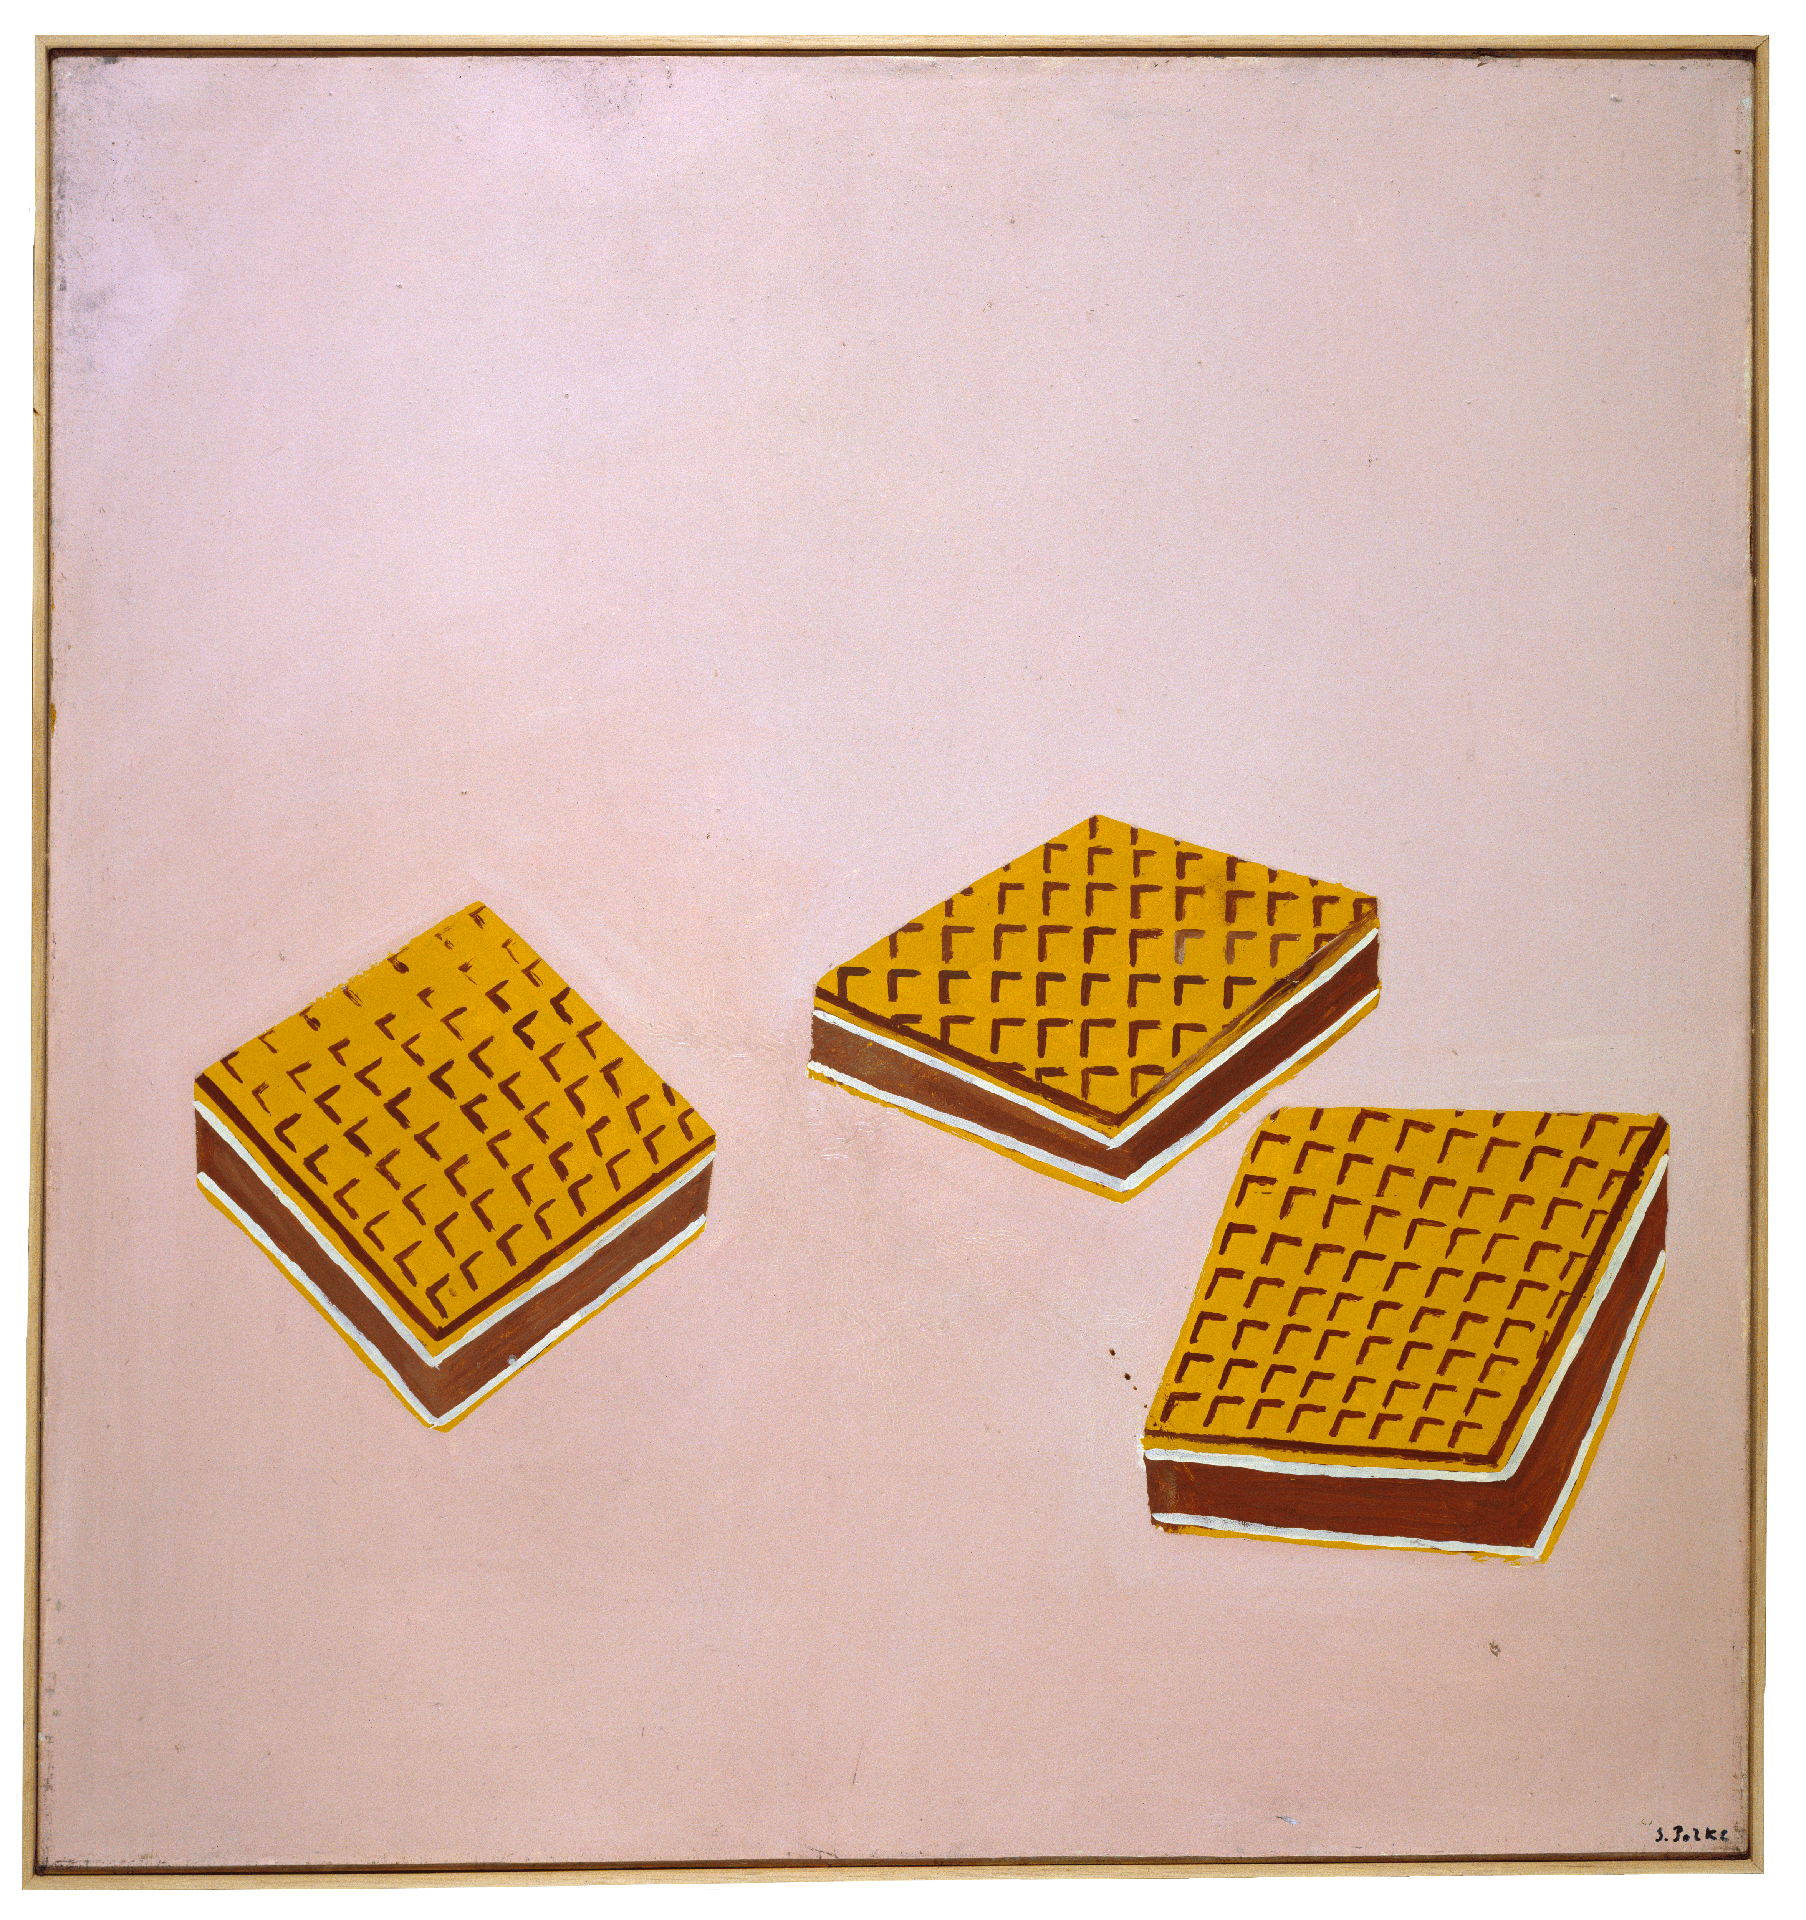 A painting by Sigmar Polke titled Kekse, translated as Biscuits, dated 1964.